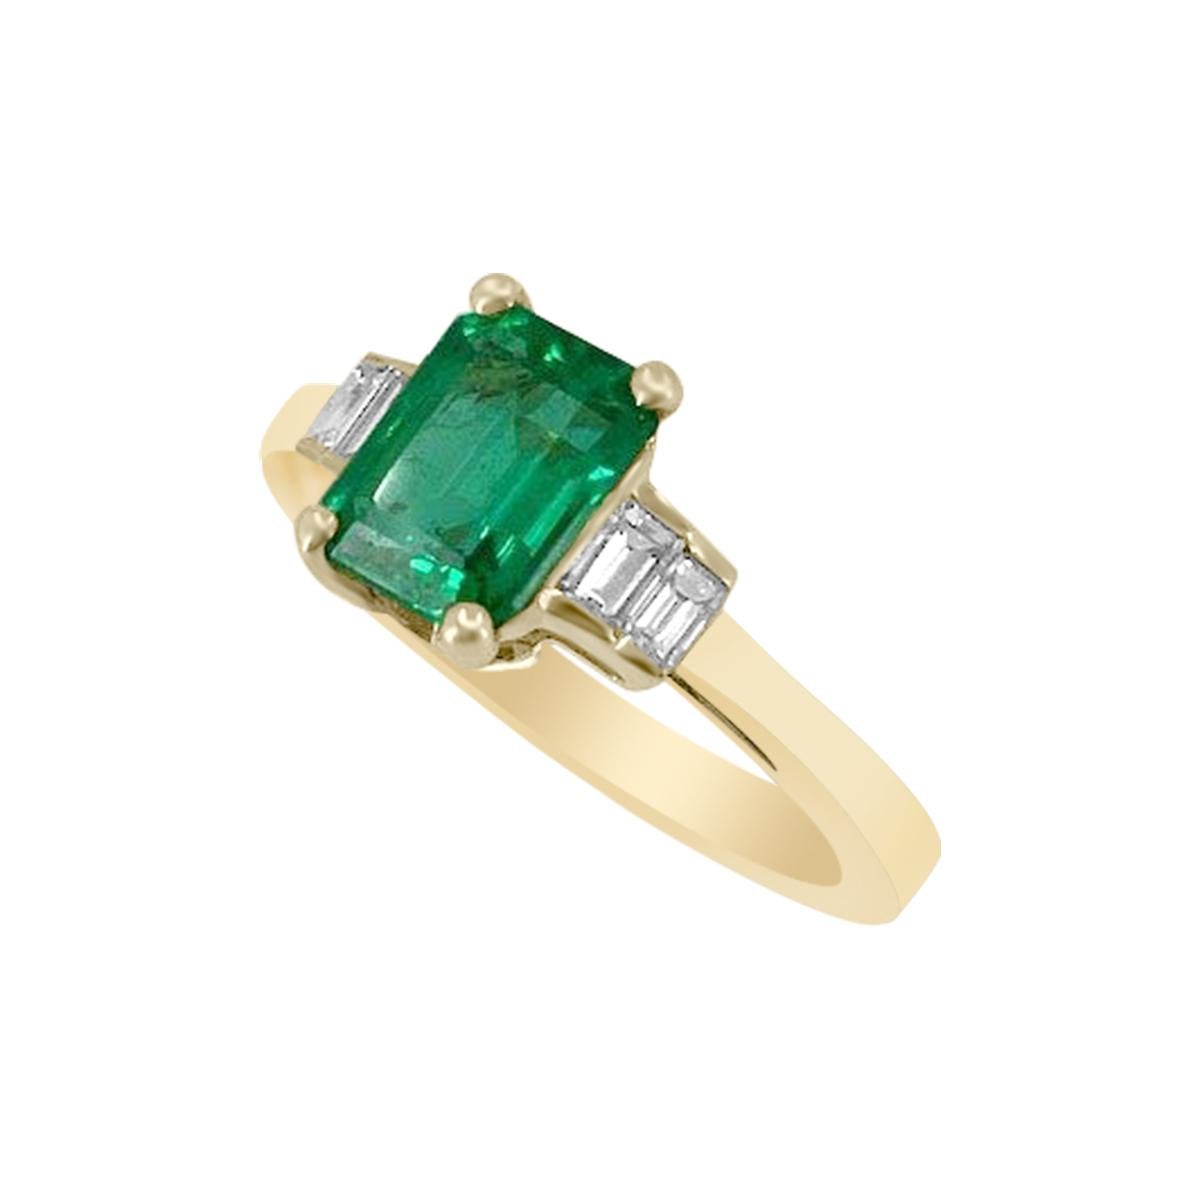 The Stunning Green Emerald Is Set In Yellow Gold And Surrounded By 4 Diamond.
This Beautiful Emerald Of 8x6mm Is In Octagon Shape With Prong Set In 18k Yellow Gold Looks So Elegant And Perfect For Daily Wear Use.


Style# R1538
Emerald : Octagon